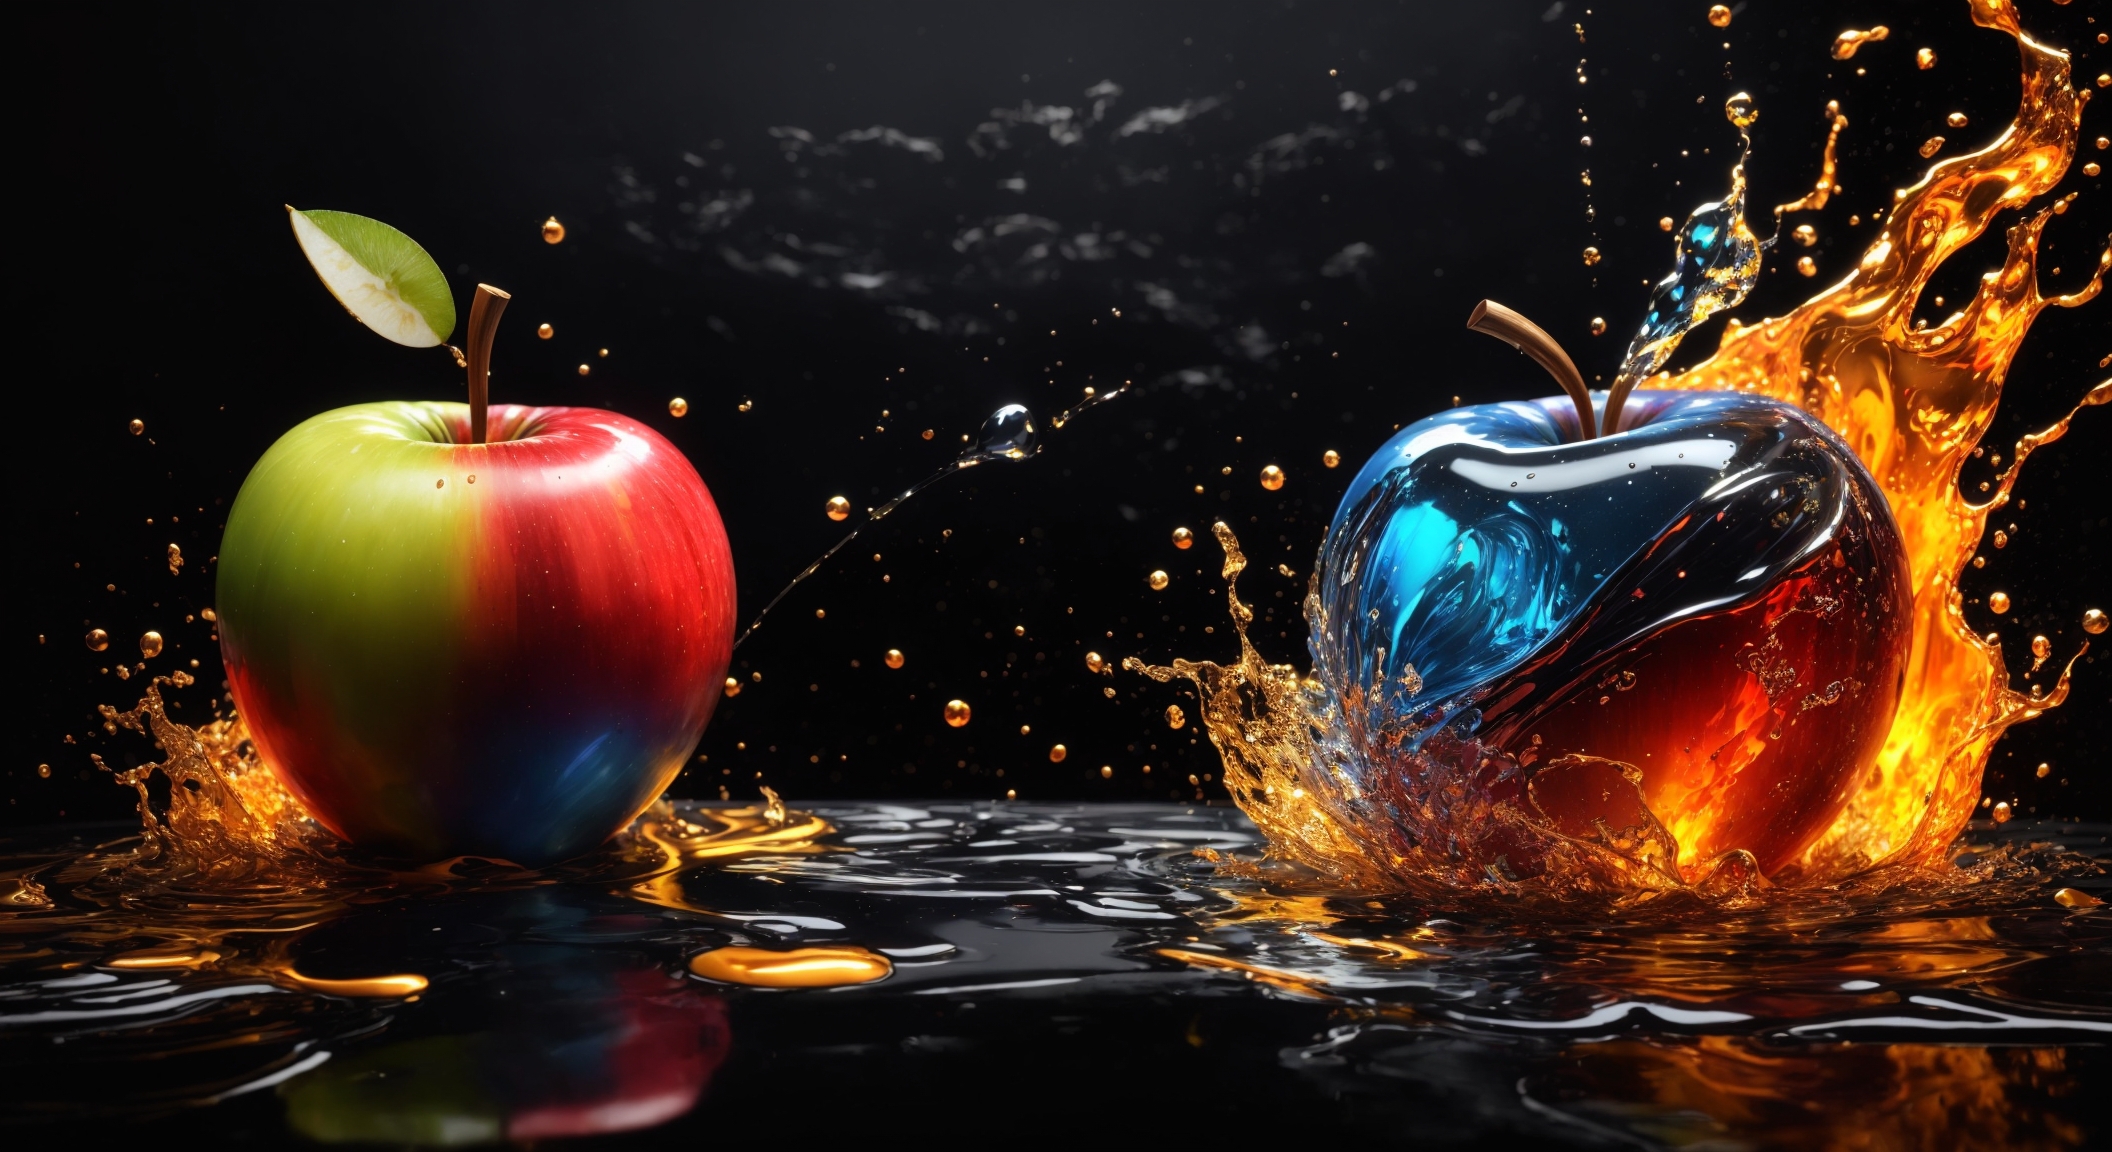 two different apples, t-shirt design, line art, black background, ultra-detailed art, beautiful, water splash, color art, fire and ice, splatter, black ink, liquid melt, dreamy, glowing, Glamour, Glimmer,shadows,Oil On Canvas, Brush Strokes, Smooth, Ultra High Definition, 8k, Unreal Engine 5, Gs Studio, Ultra Sharp Focus, Intricate Artwork Masterpiece, Golden Ratio, High Detail, Vibrant, Production Cinematic Character Render, Ultra High Quality Model, ultra high definition, 30 megapixels, sharp focus, front camera, monovisions, perfect contrast, high sharpness, art quality by GIlSam-paio, octane rendering, 8k, ultra high definition, Studio Gs Cinema HD